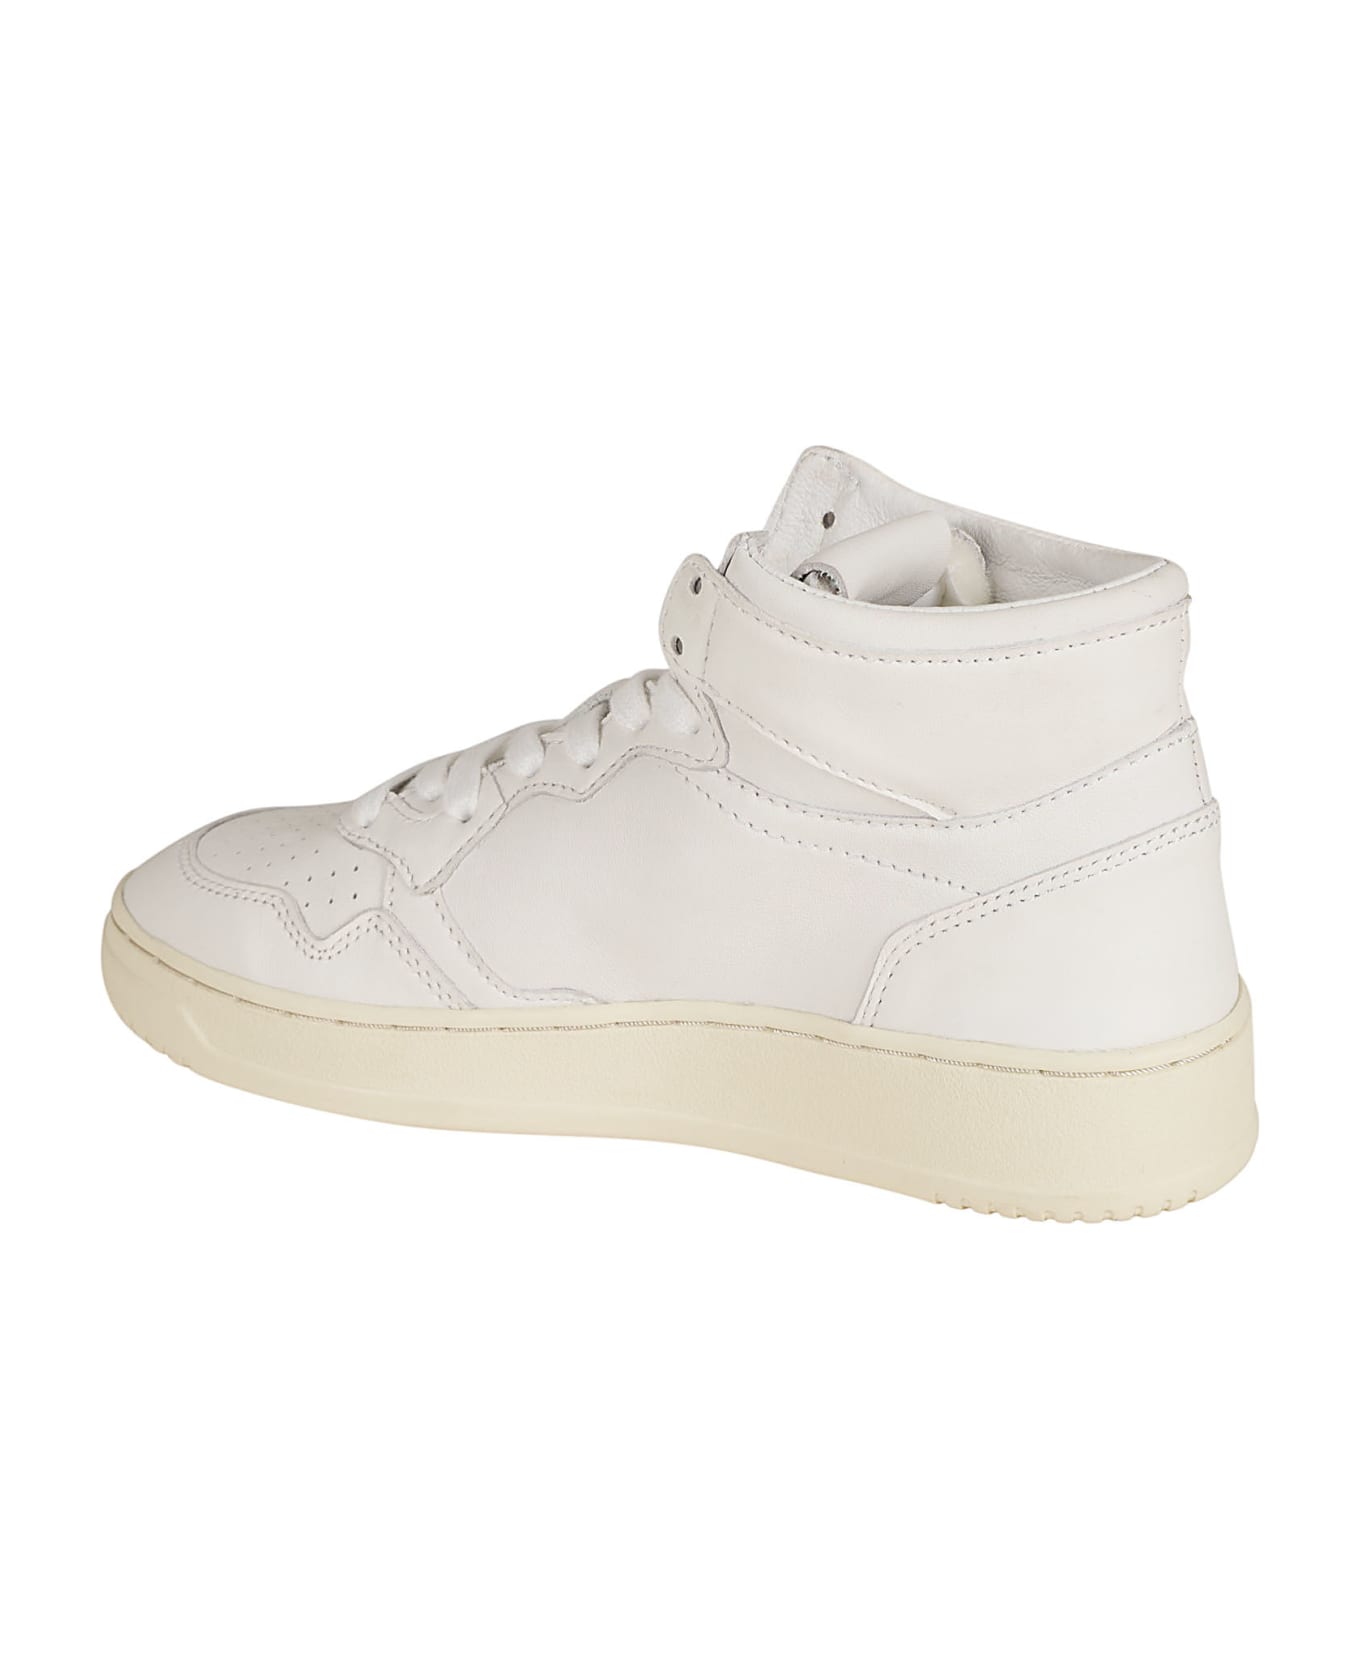 Autry Medalist Mid-top Sneakers - White スニーカー